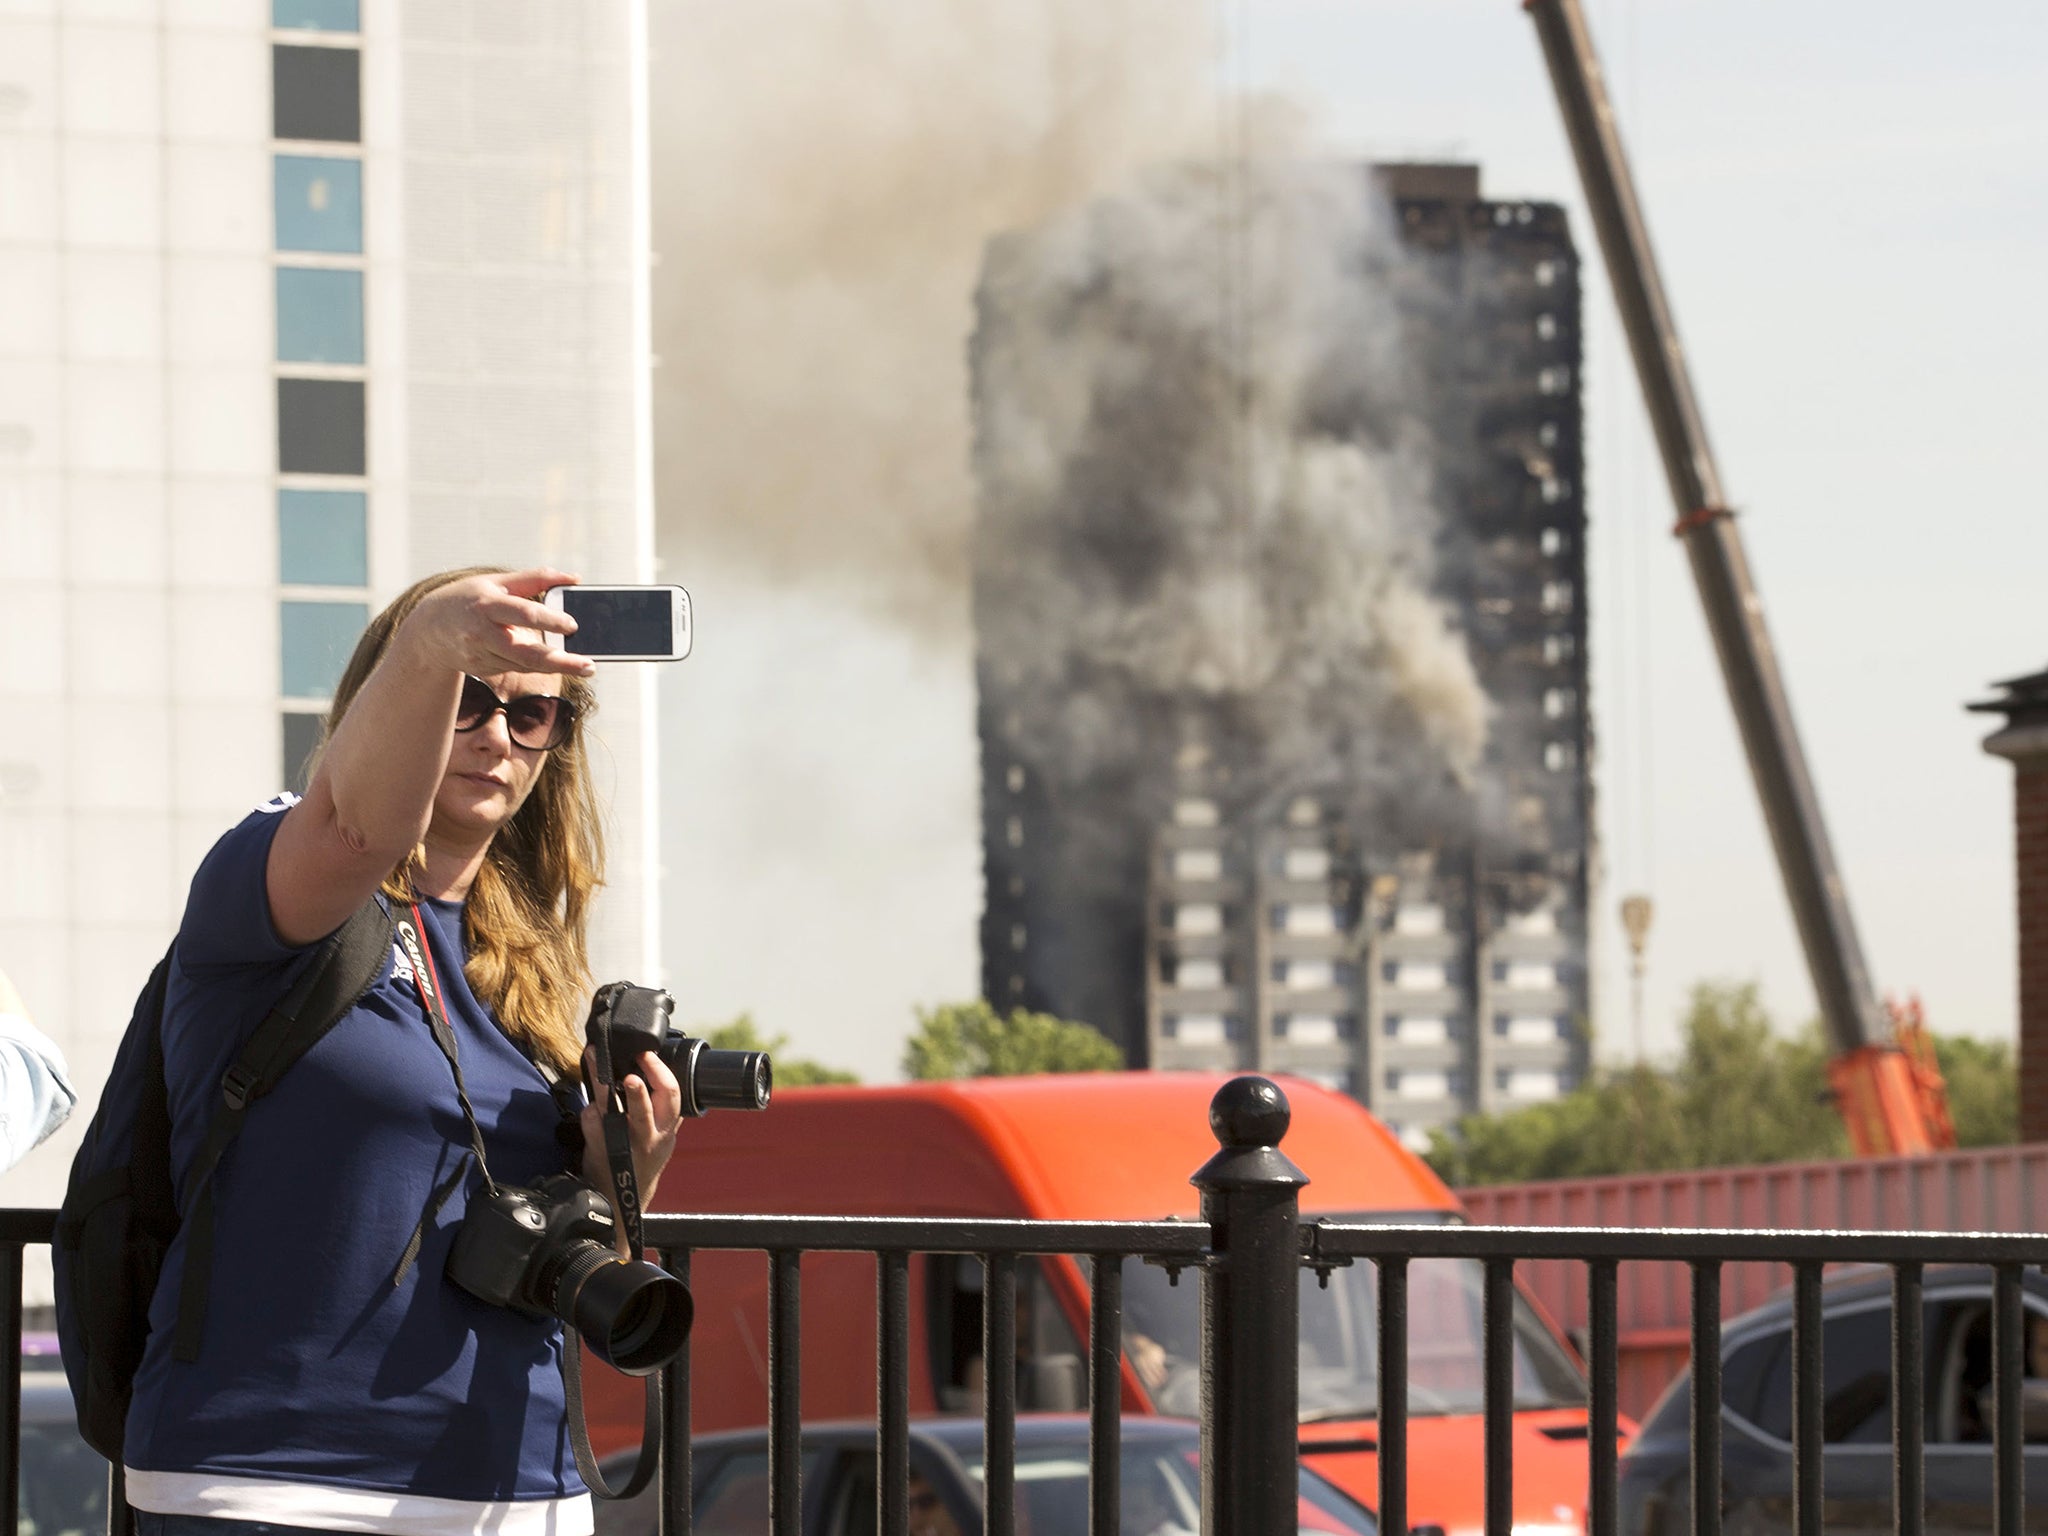 Bystanders are said to be taking photos in front of the blackened skeleton of the tower block without paying their respects